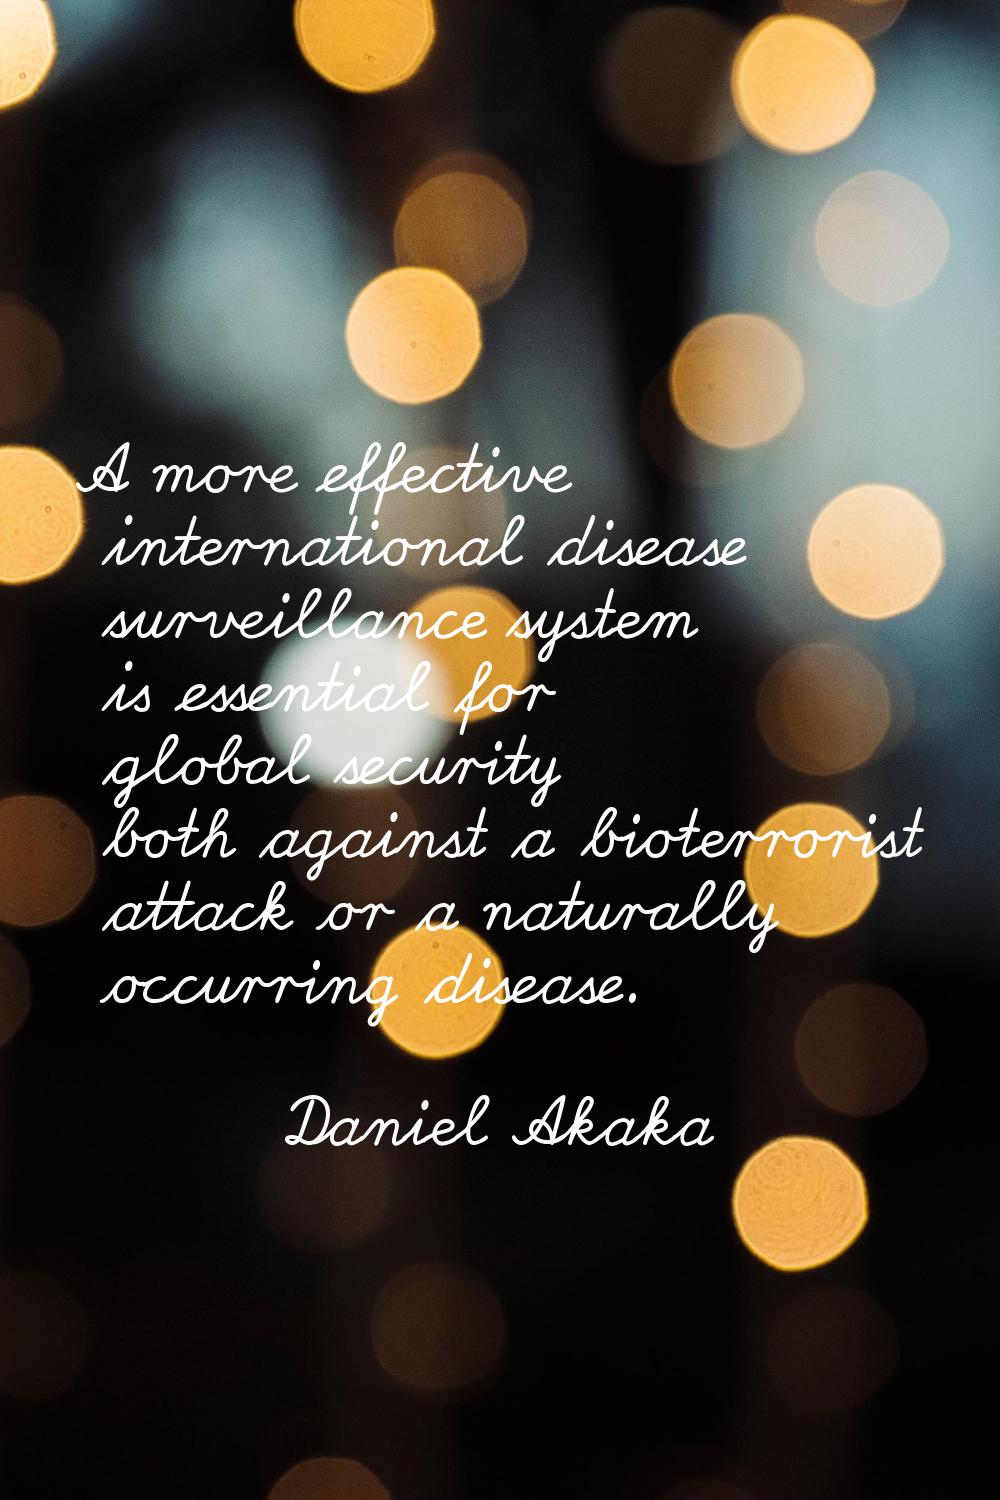 A more effective international disease surveillance system is essential for global security both ag